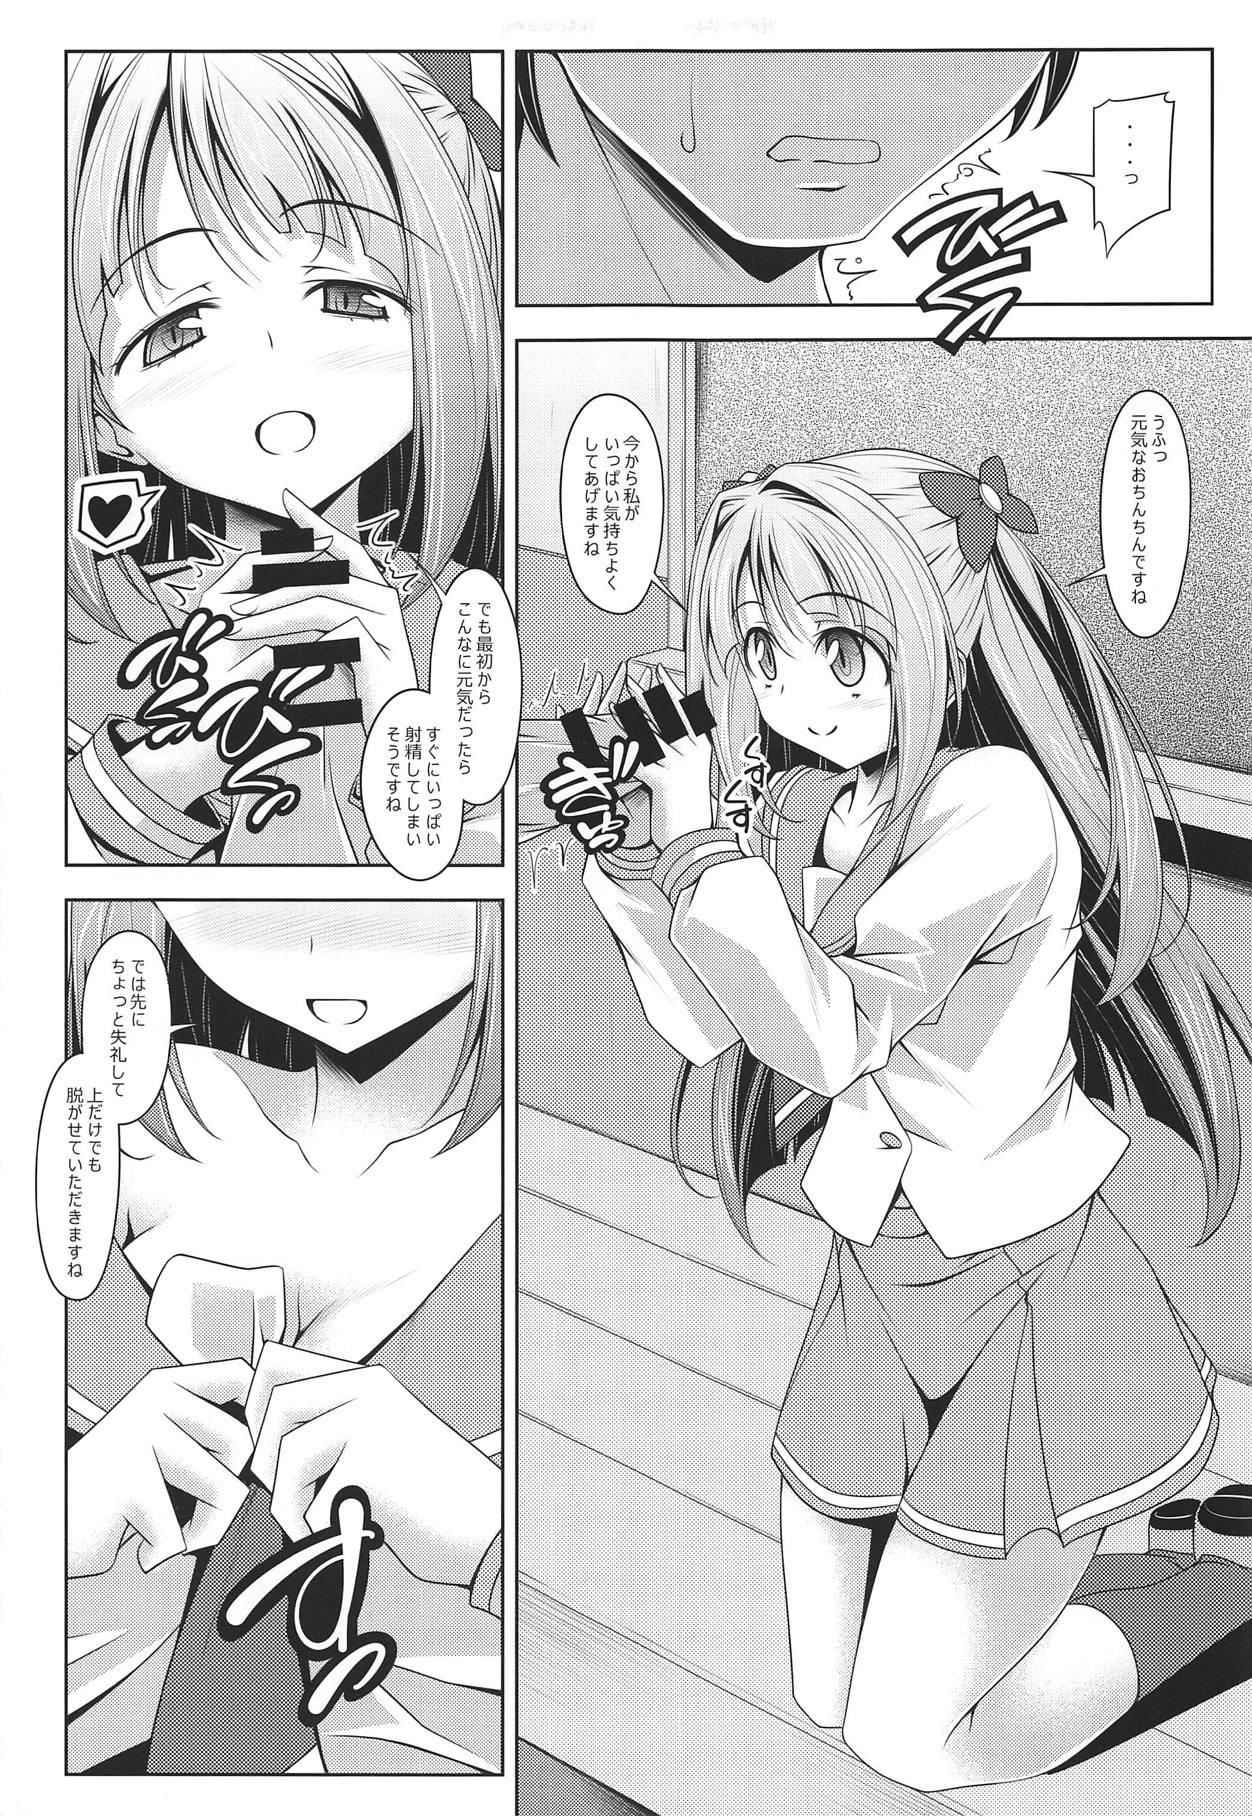 18 Year Old Porn SPACE KAGUYA - Star twinkle precure Pussy Eating - Page 4